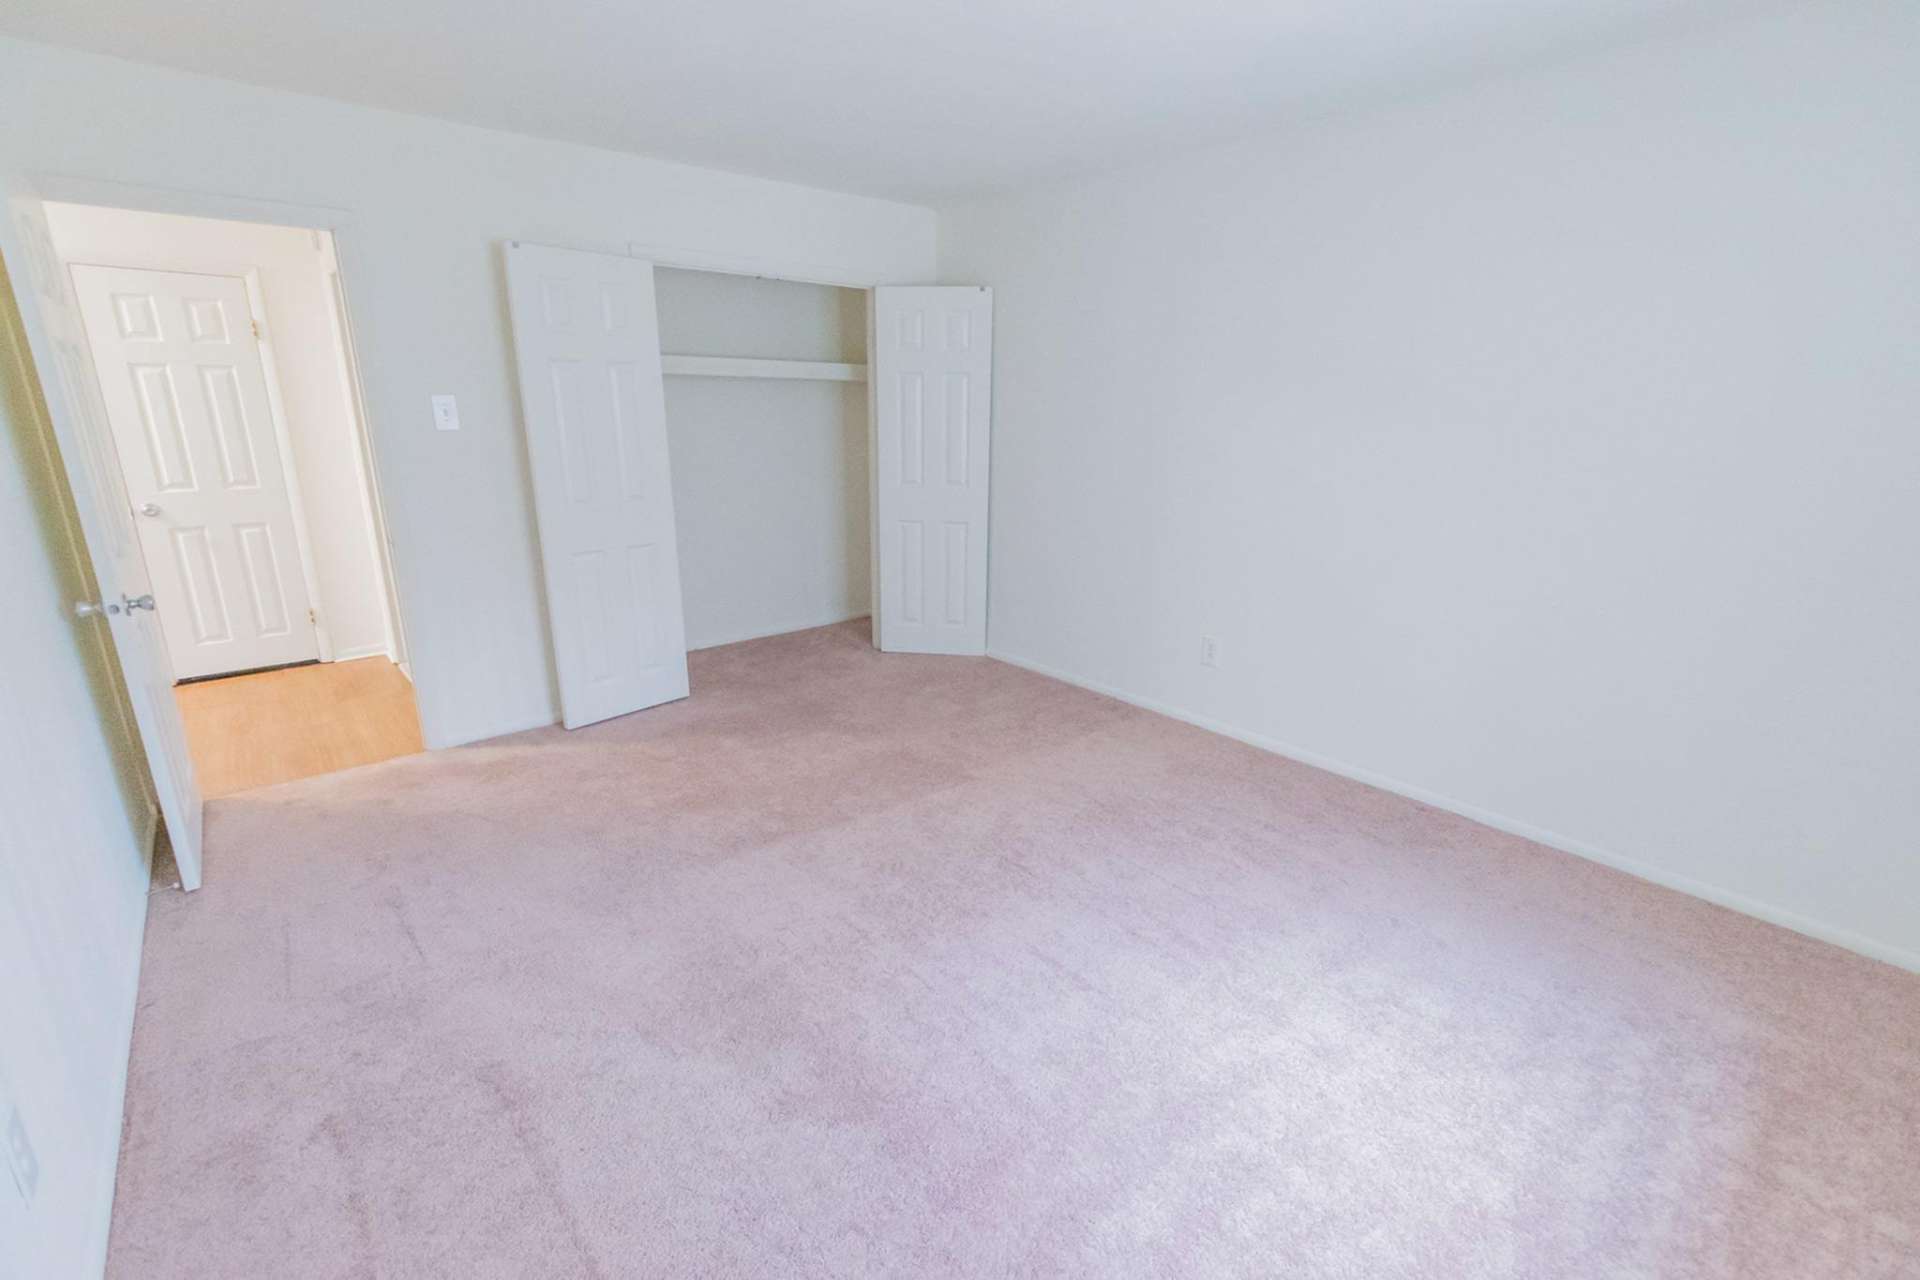 Carpeted bedroom with a closet in an apartment at Hollow Run.